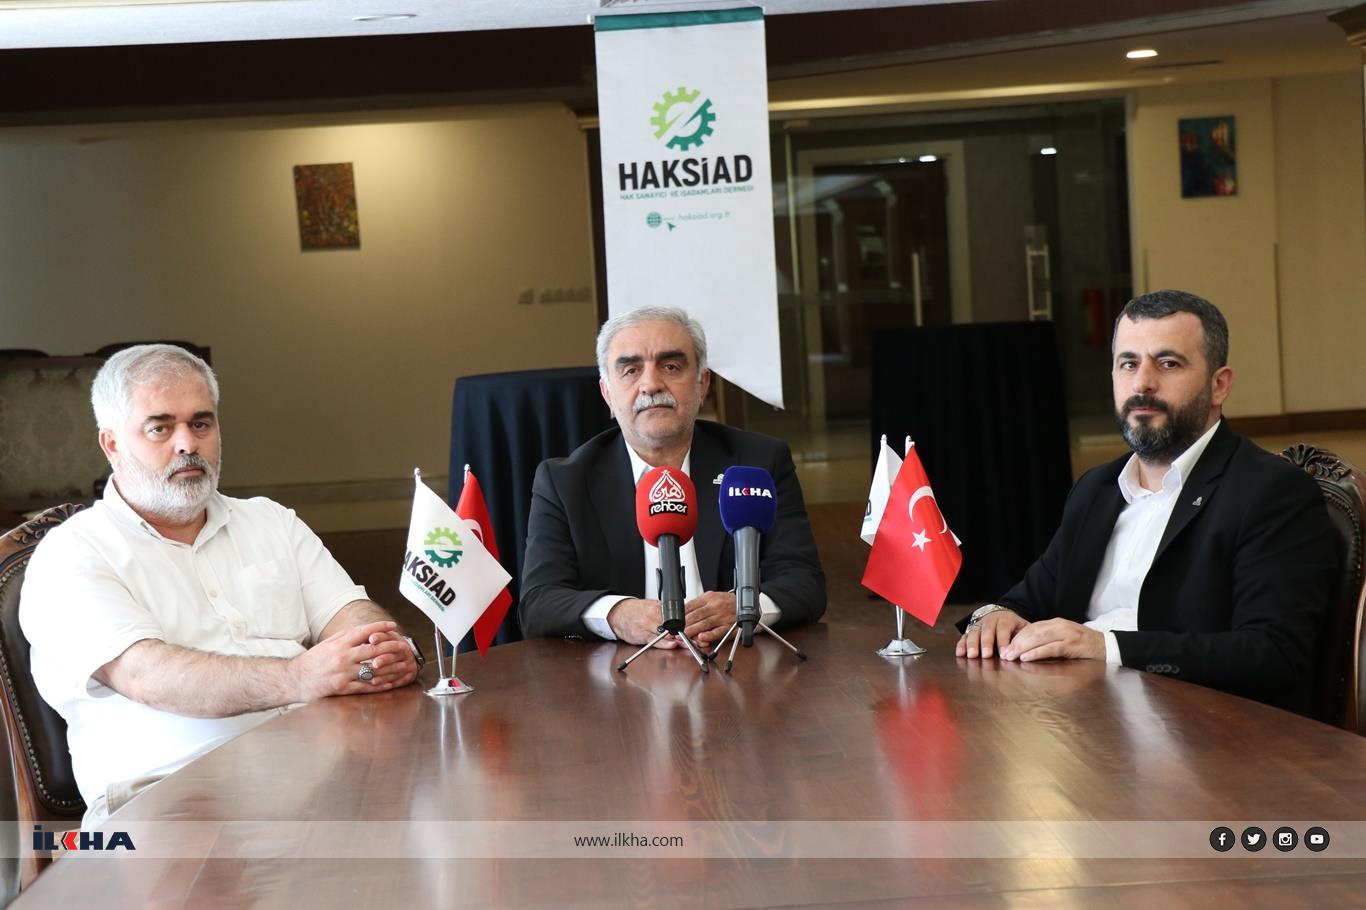 HAKSIAD's 2023 Businessmen's Meeting concludes with emphasis on global trade challenges